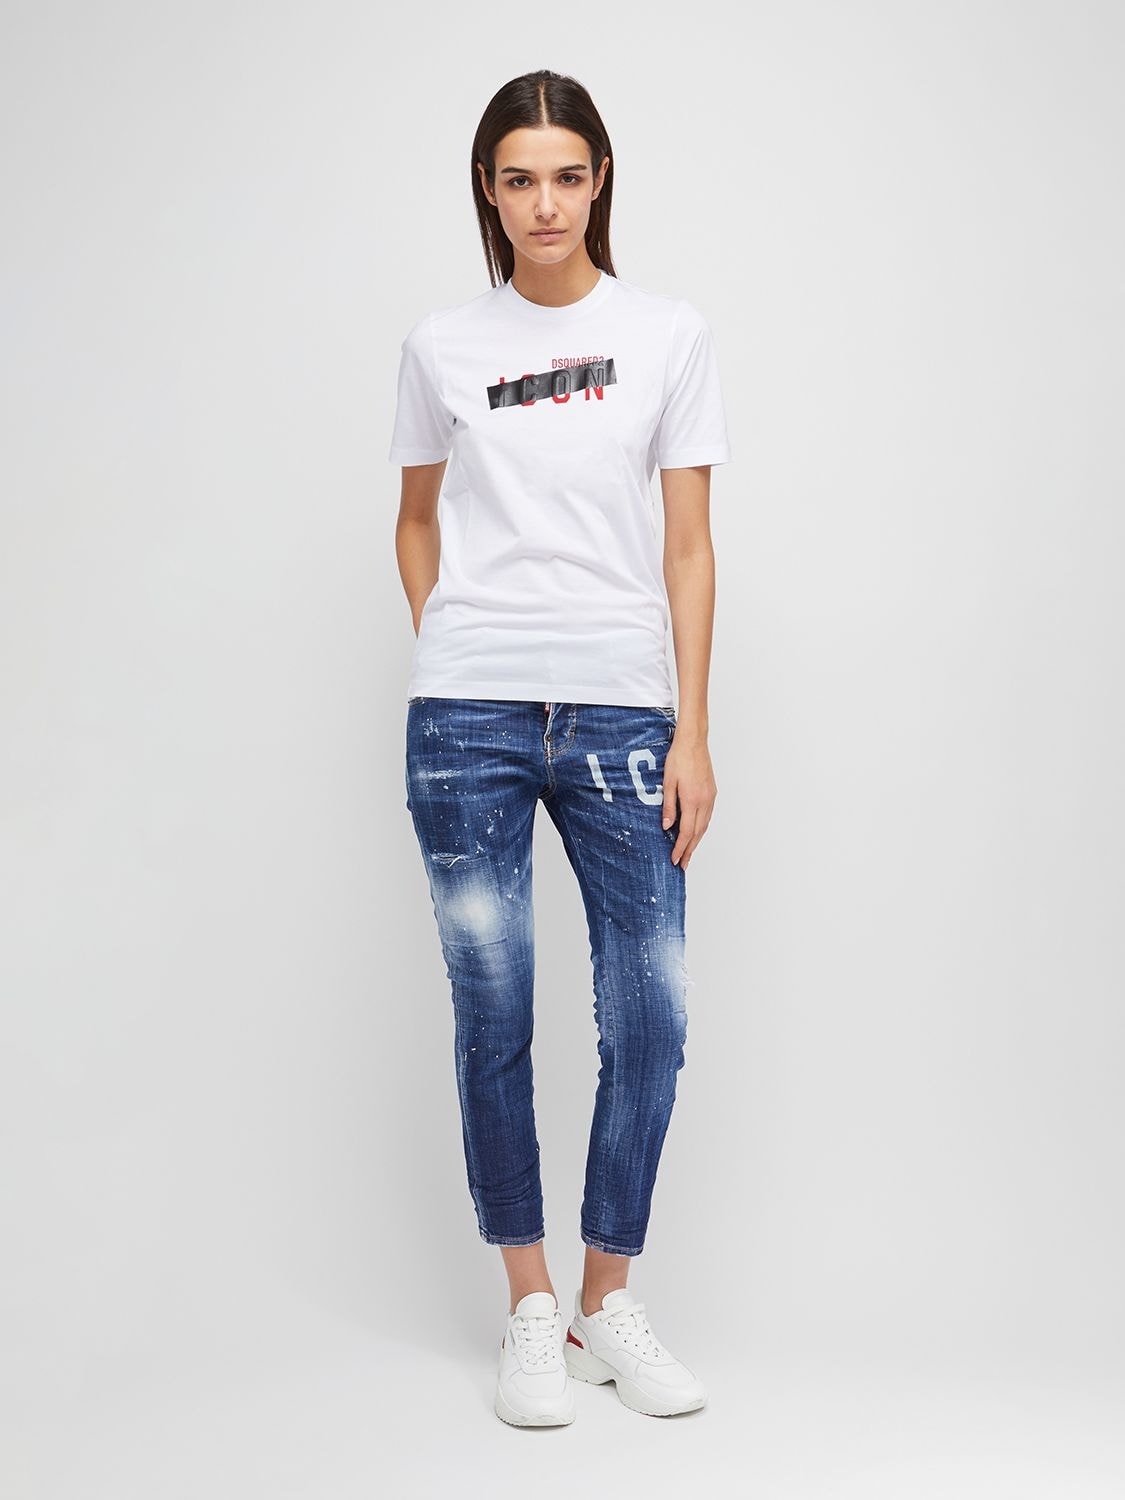 DSQUARED2 ICON COOL GIRL JEAN COTTON DENIM JEANS,74I07Y153-NDCW0